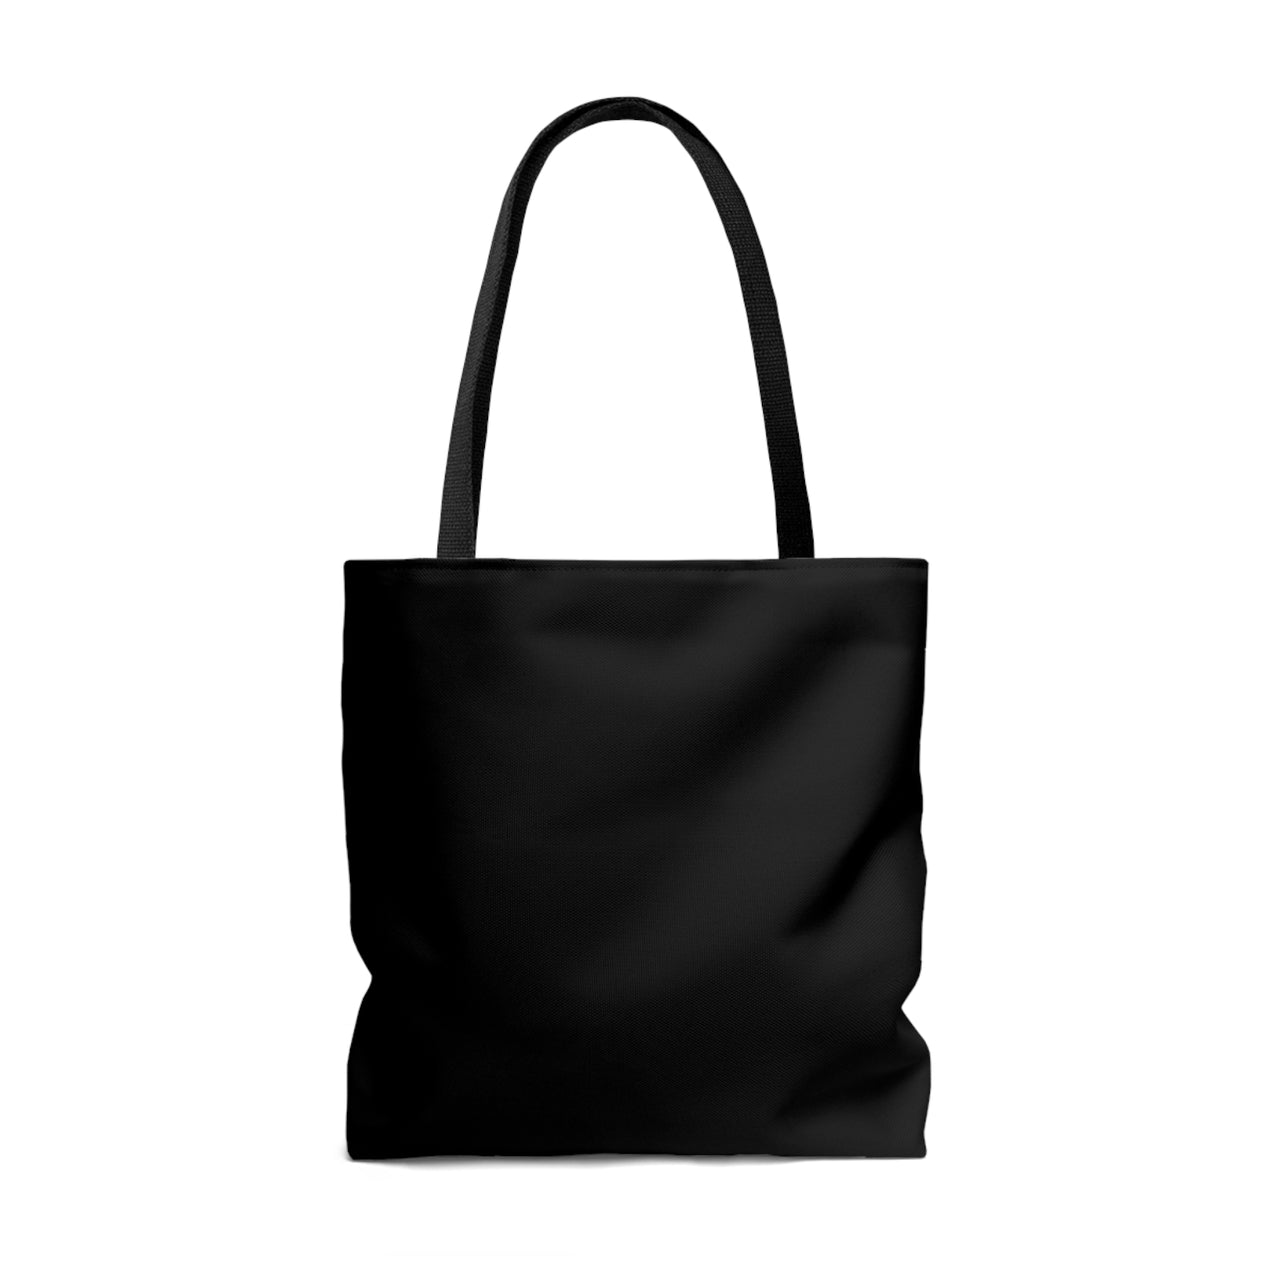 I Just Want To Drink Coffee And Pet My Dogs 🐶🐶 Black Tote Bag